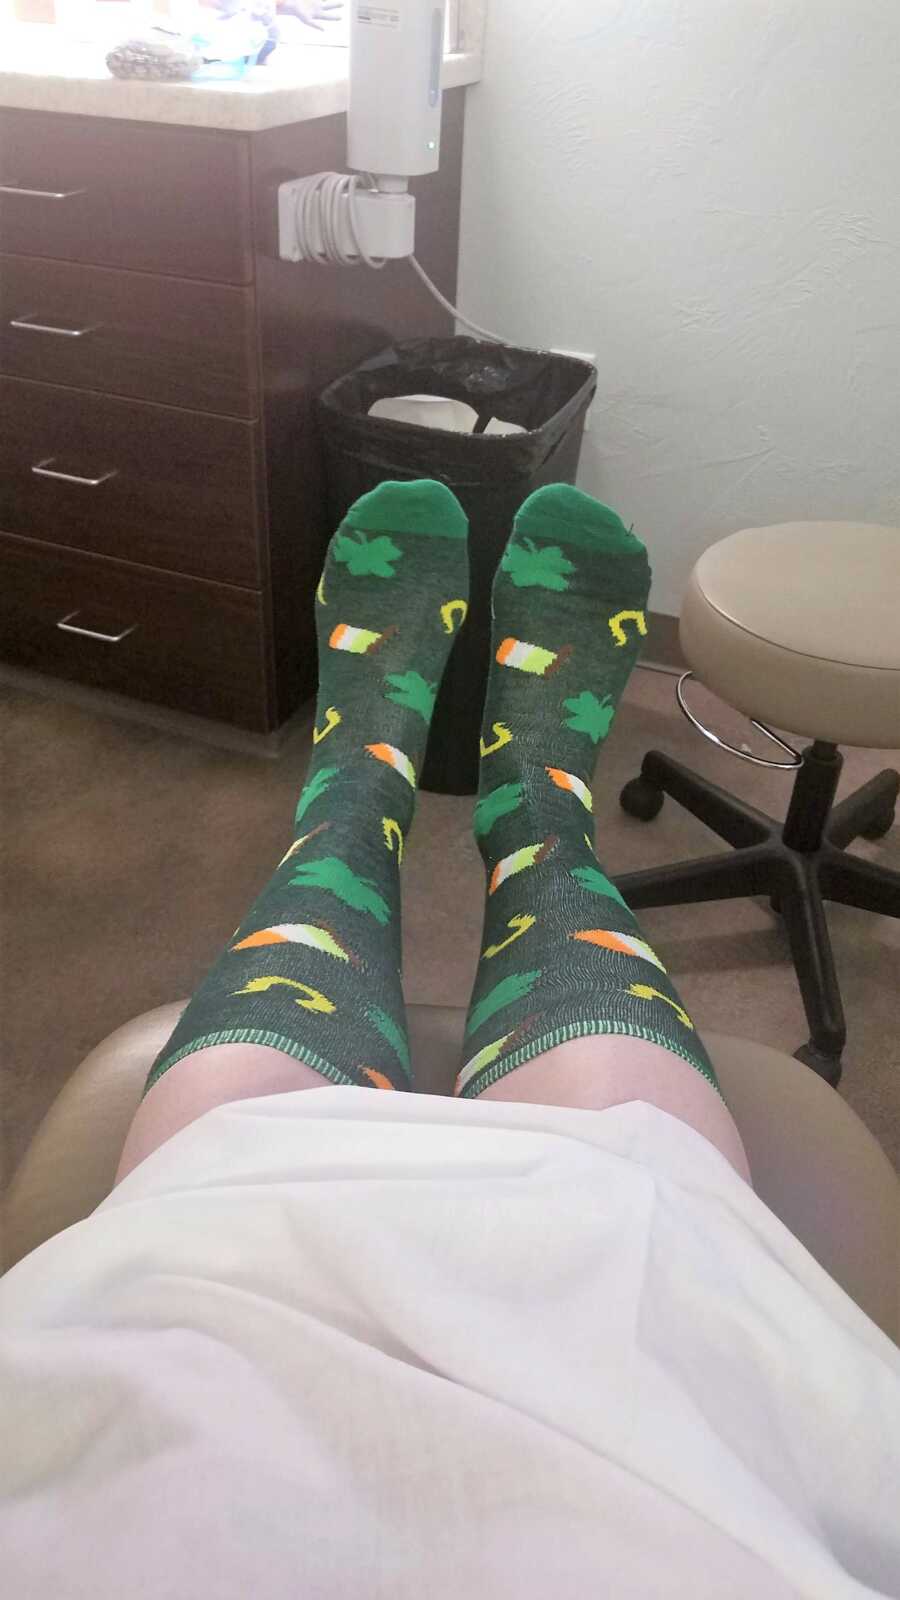 picture of a woman's legs and feet wearing Irish themed socks at a doctors appointment 